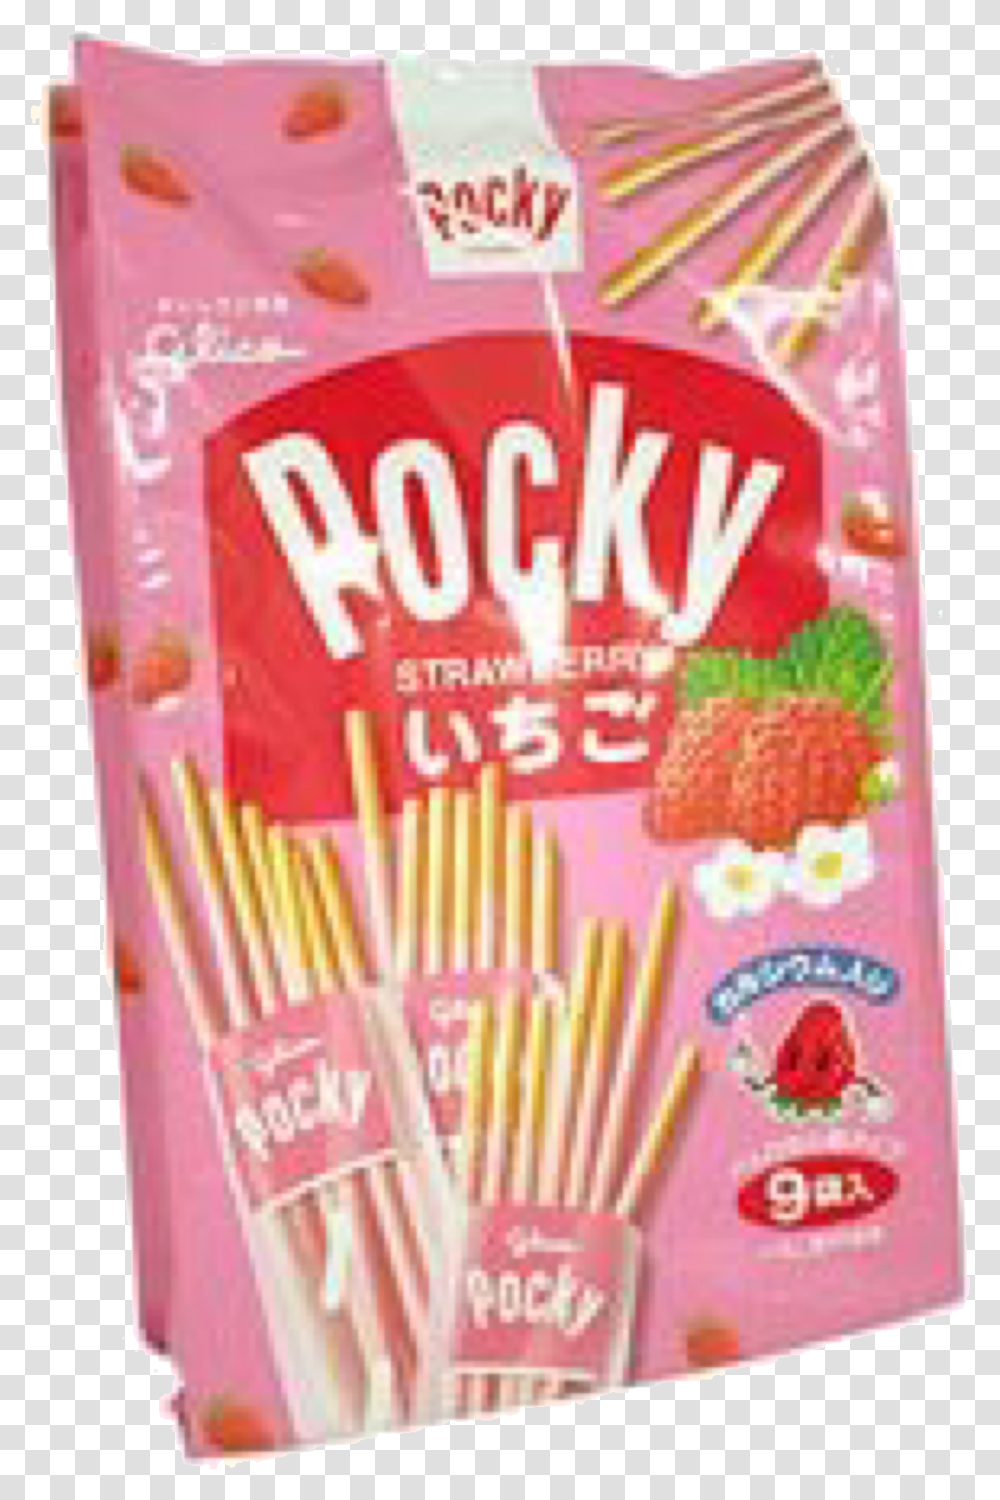 Chocolate Biscuits Chocolate Coating Travel Snacks Strawberry Pocky 9 Bags, Sweets, Food, Confectionery, Incense Transparent Png